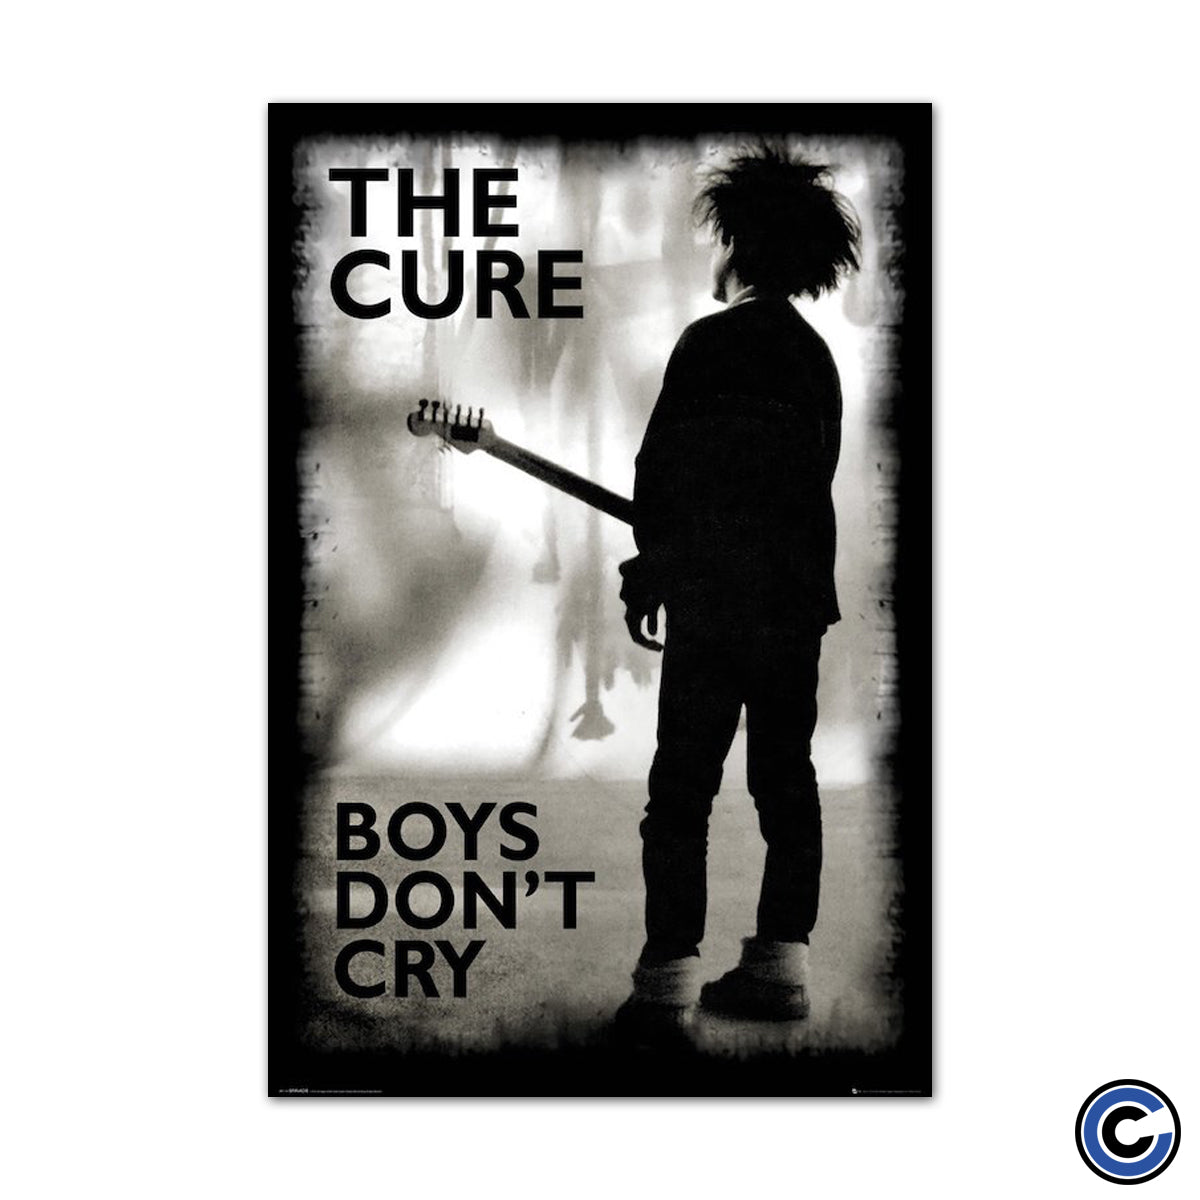 The Cure "The Boys Don't Cry" Poster